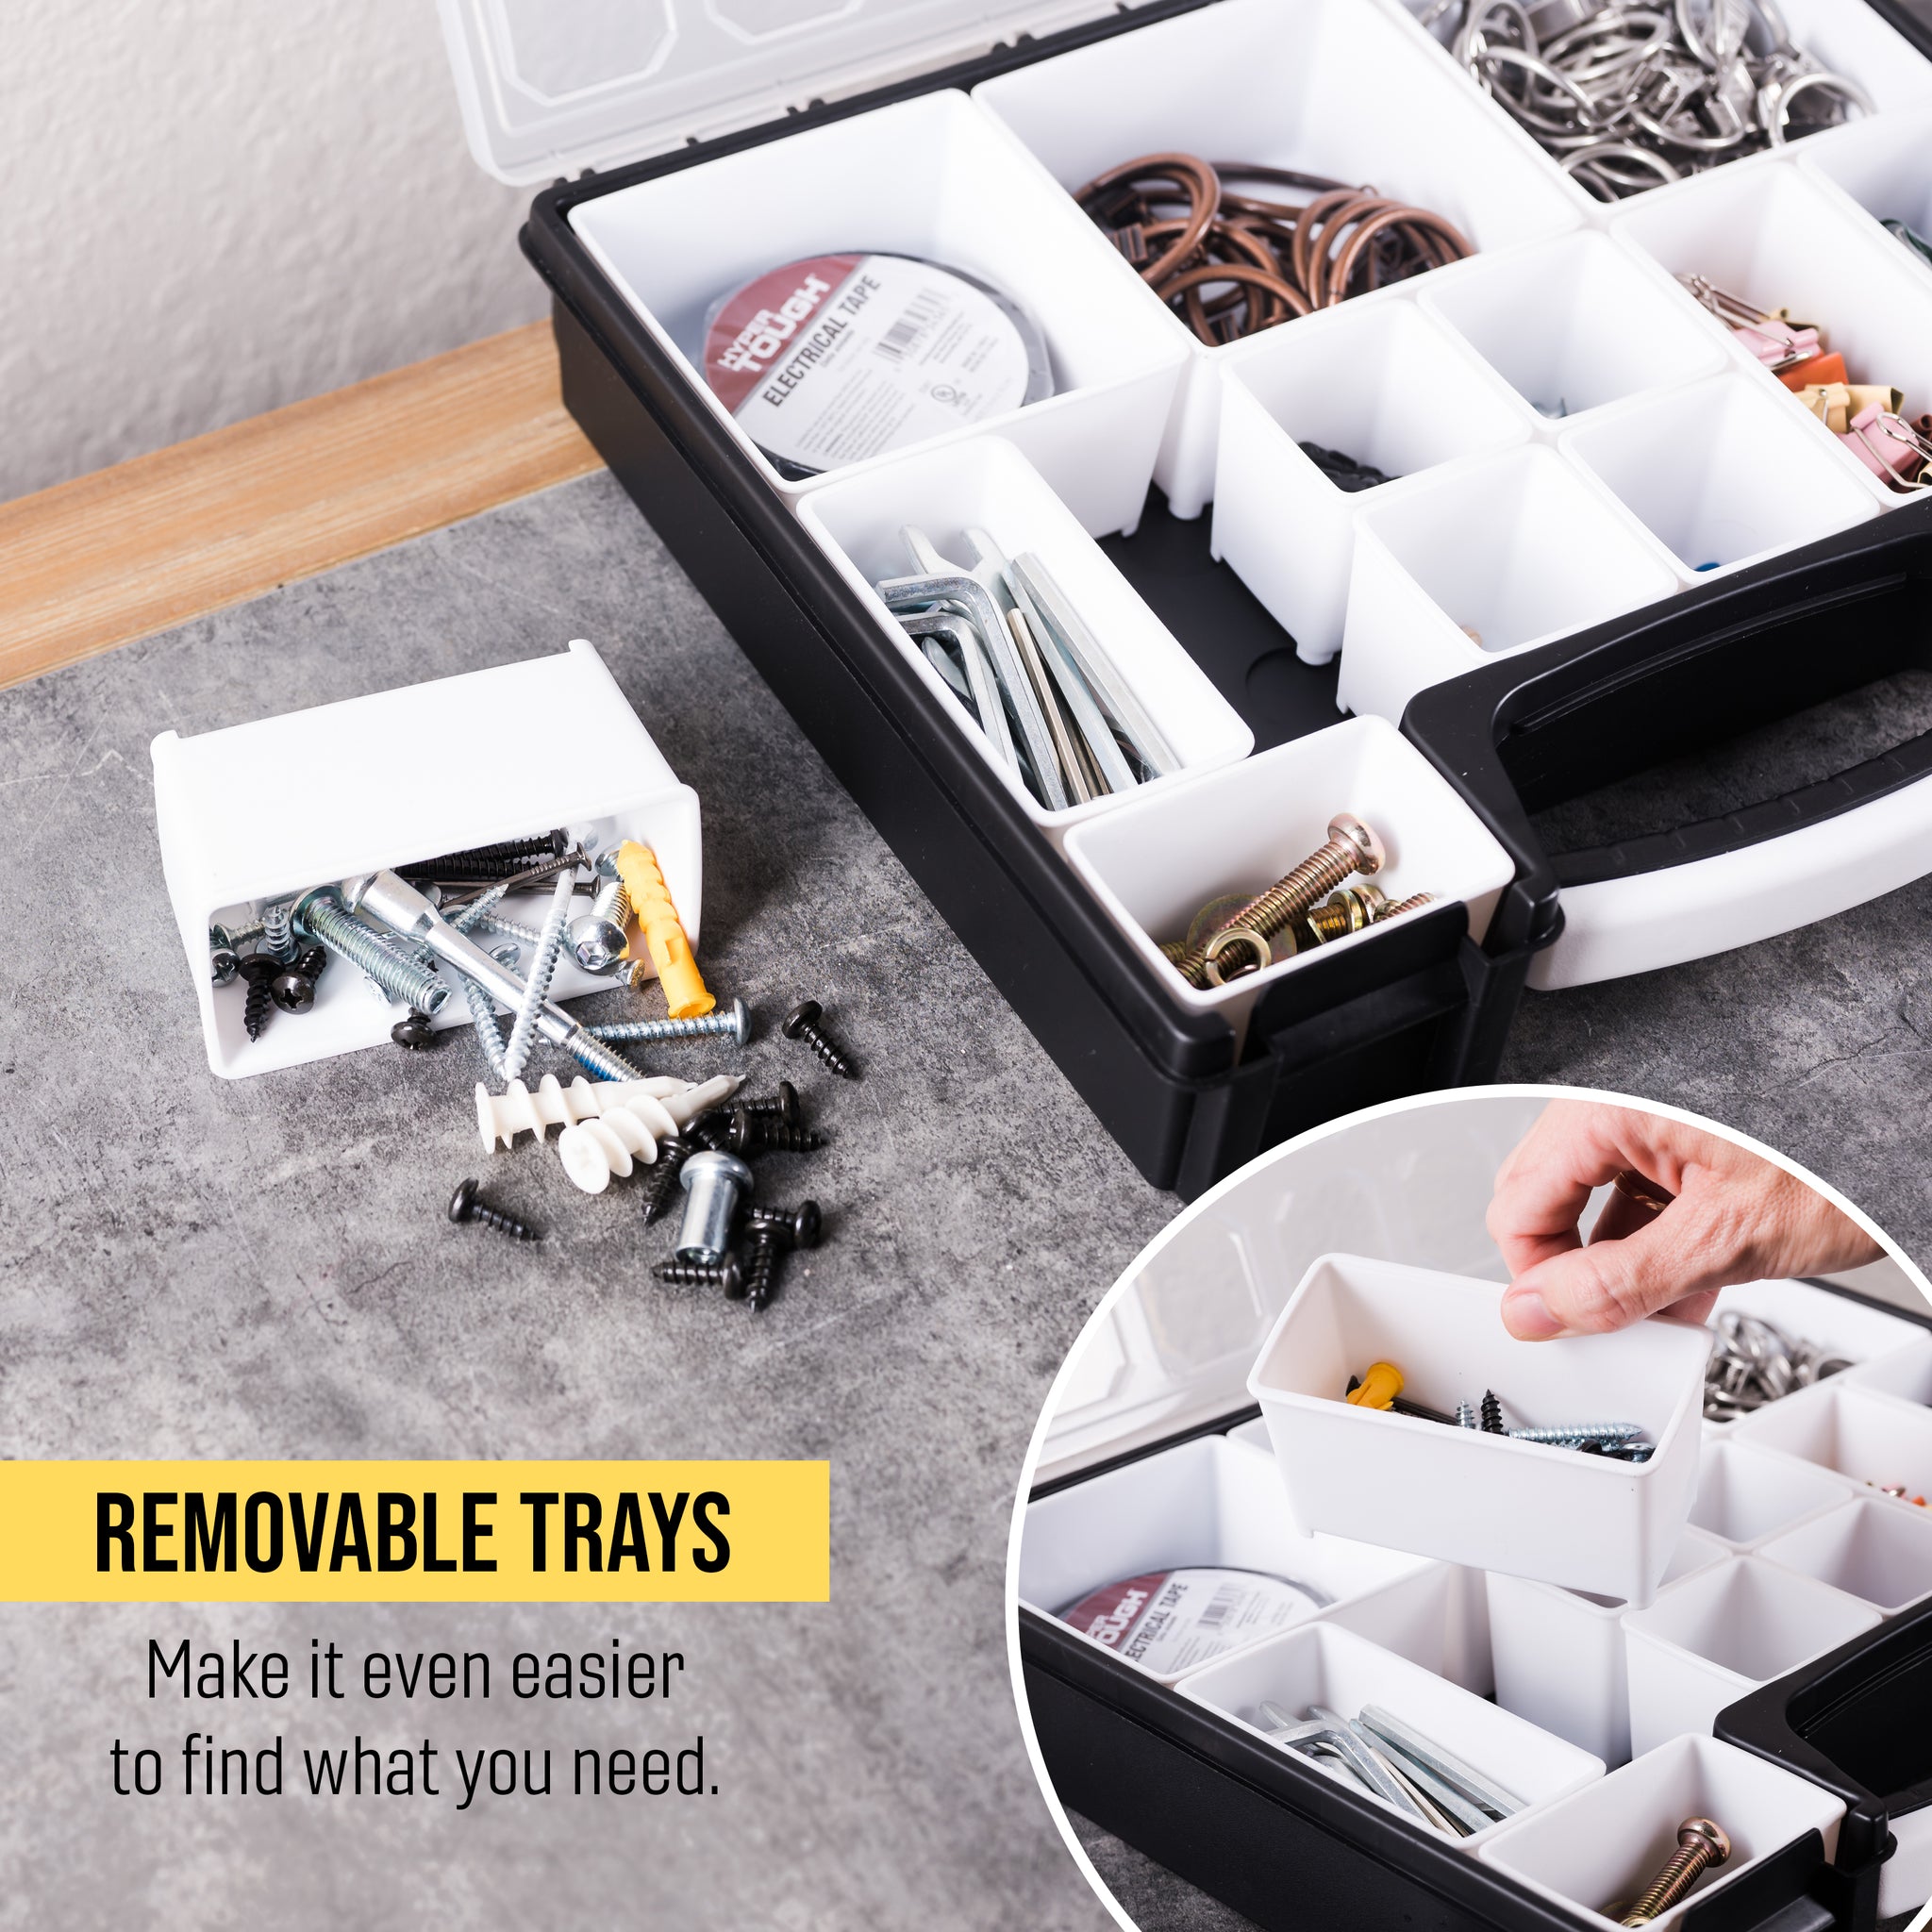 How to Make an Organizer Box for Storing Screws